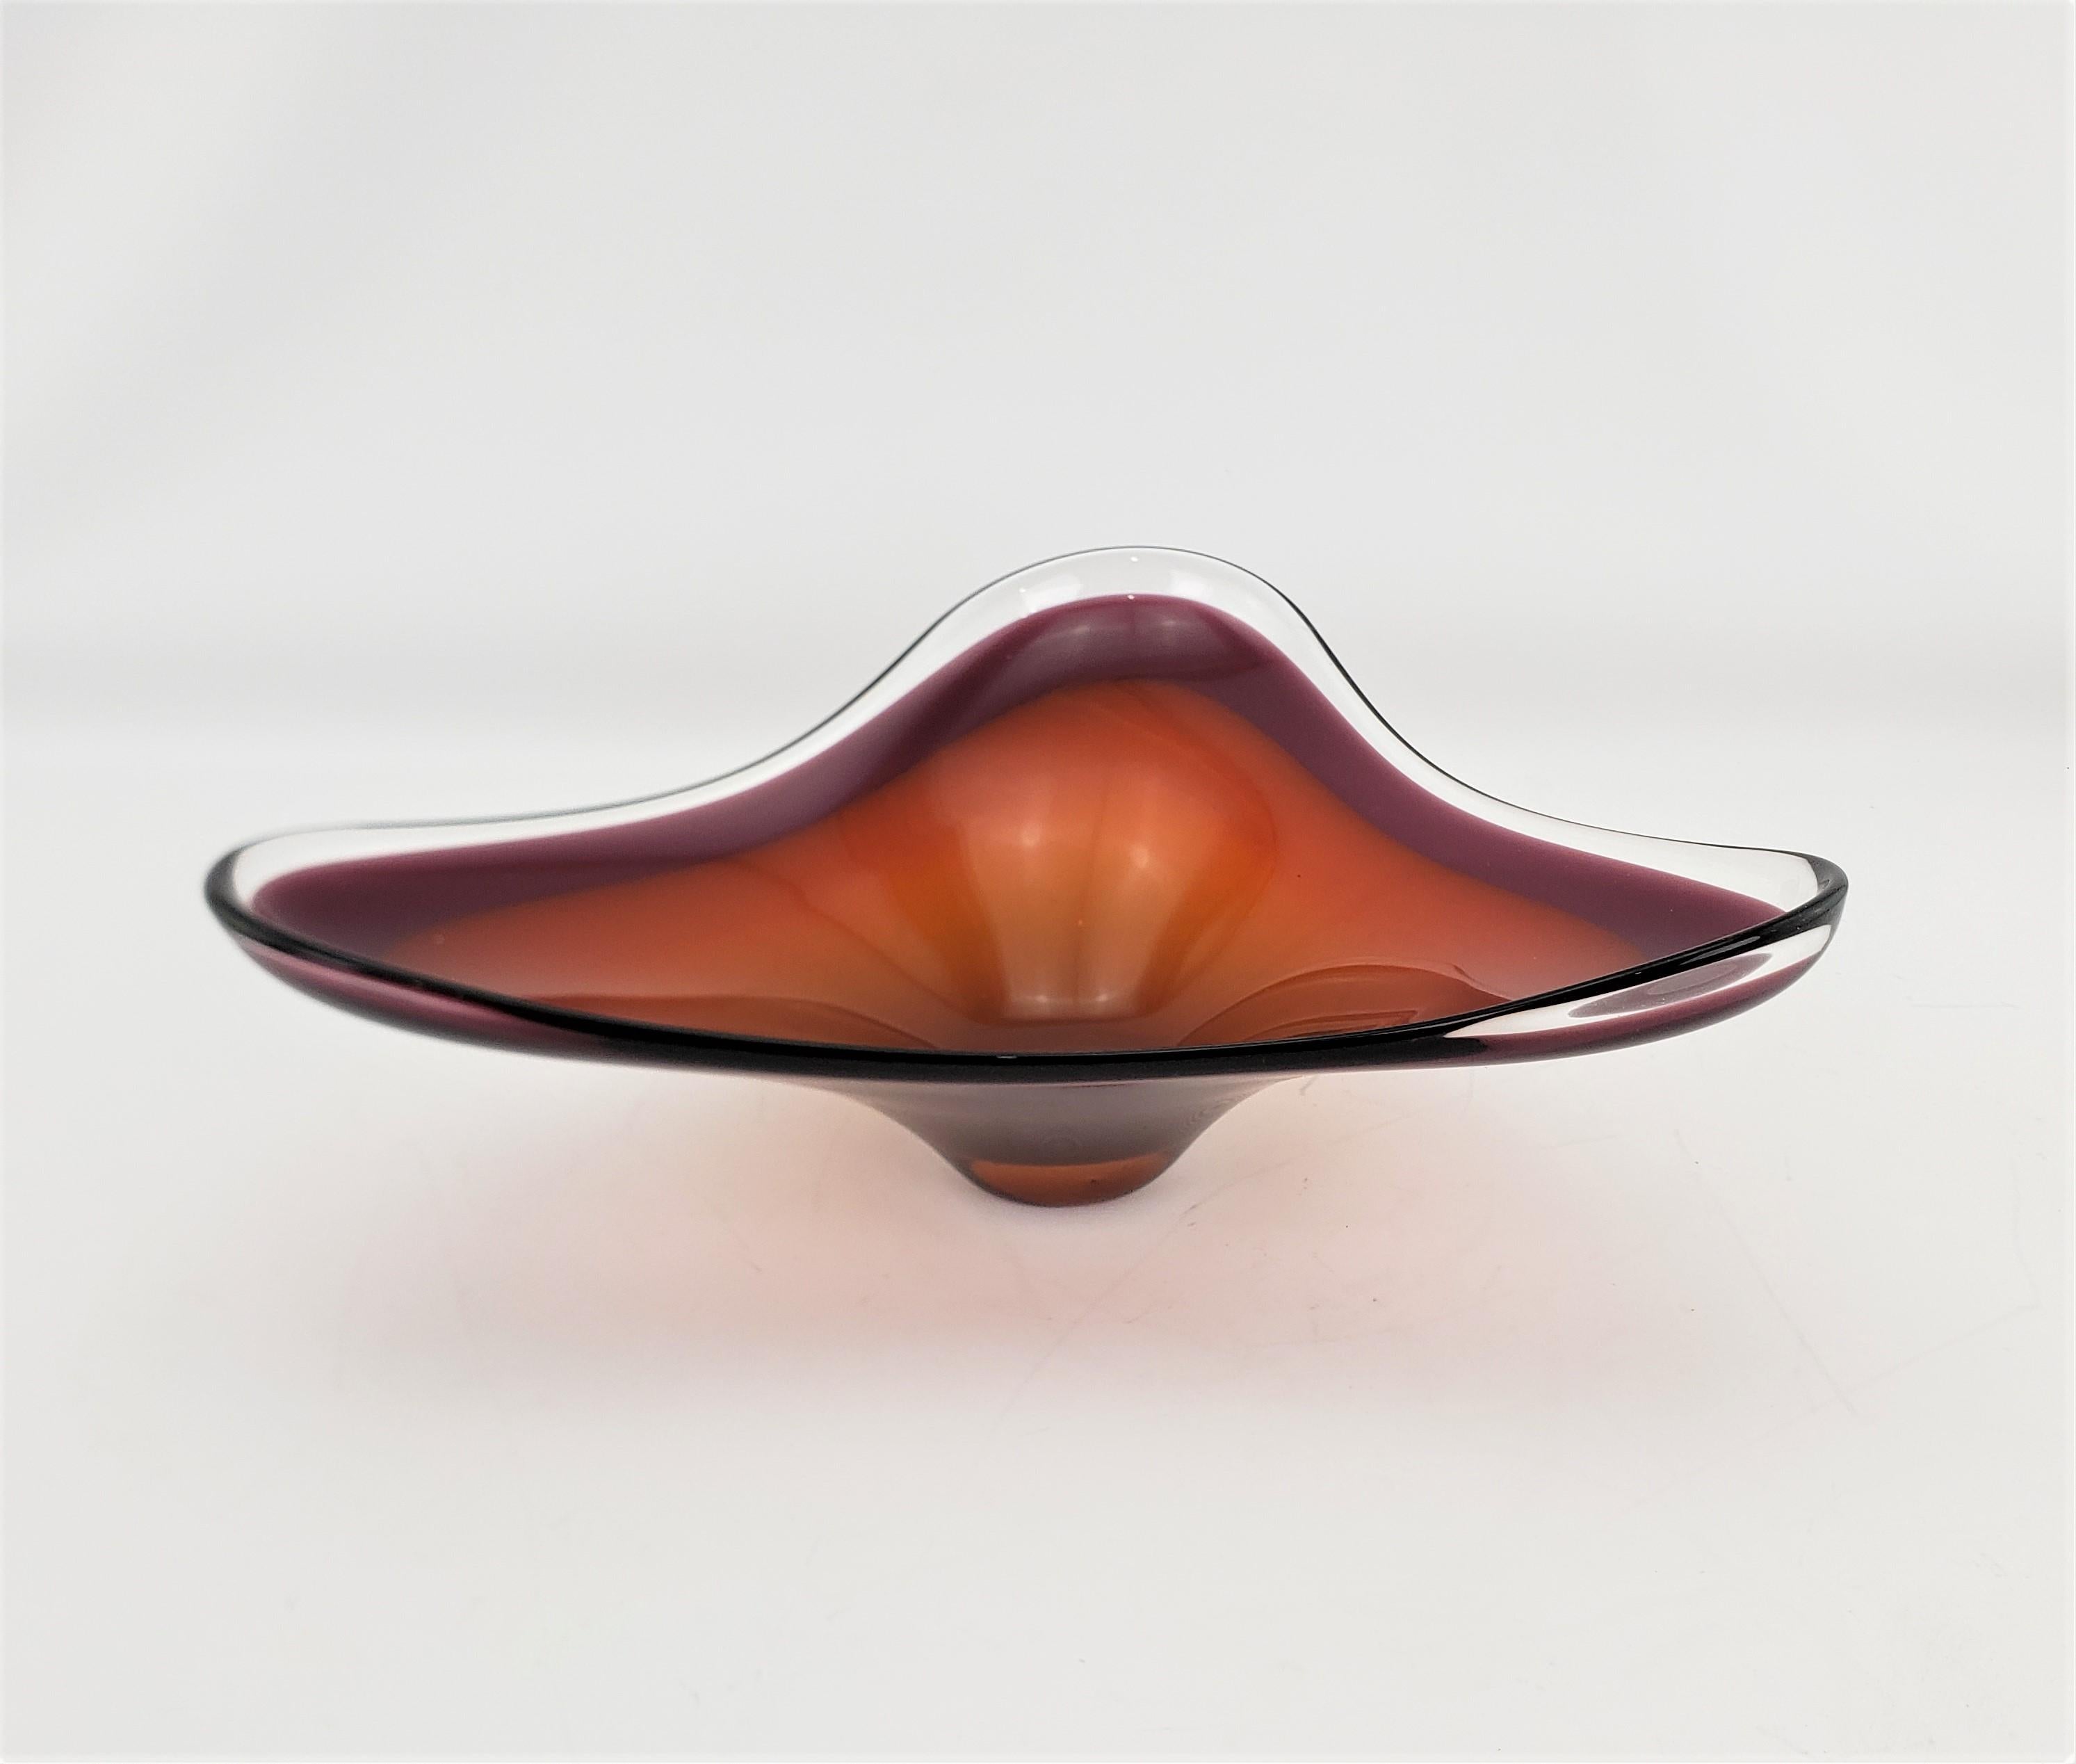 This large and substantial biomorphic shaped art glass bowl is unsigned, but presumed to have been made in Scandinavia, likely Sweden, in approximately 1970 in the period Mid-Century Modern style. The bowl or centerpiece, given its size, is done